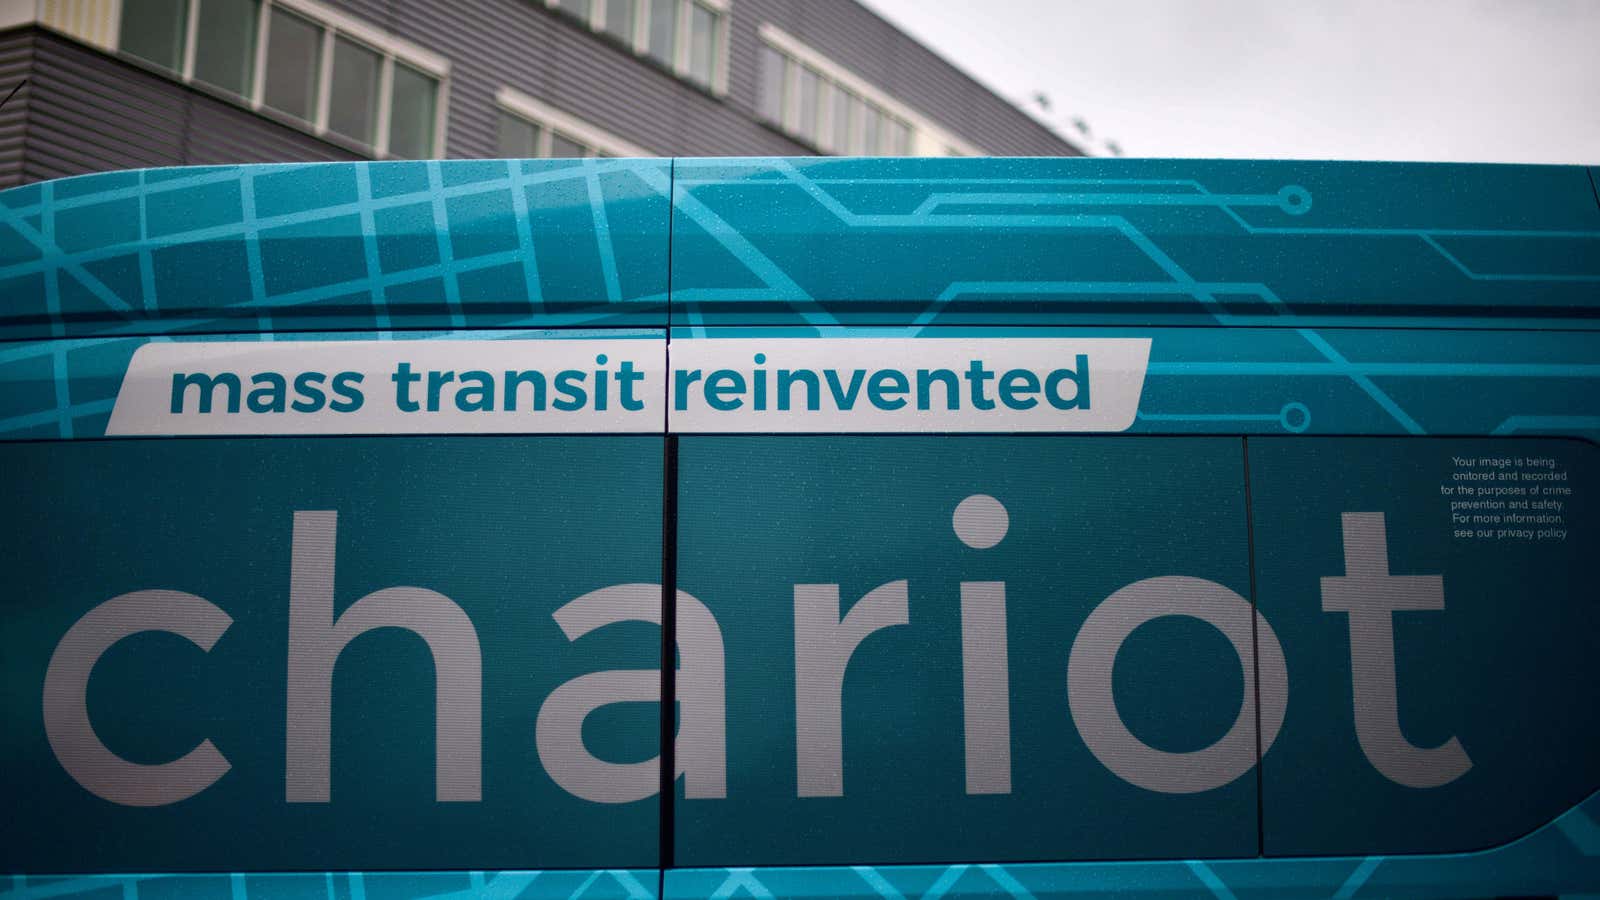 Chariot struggled to put the “mass” in mass transit.